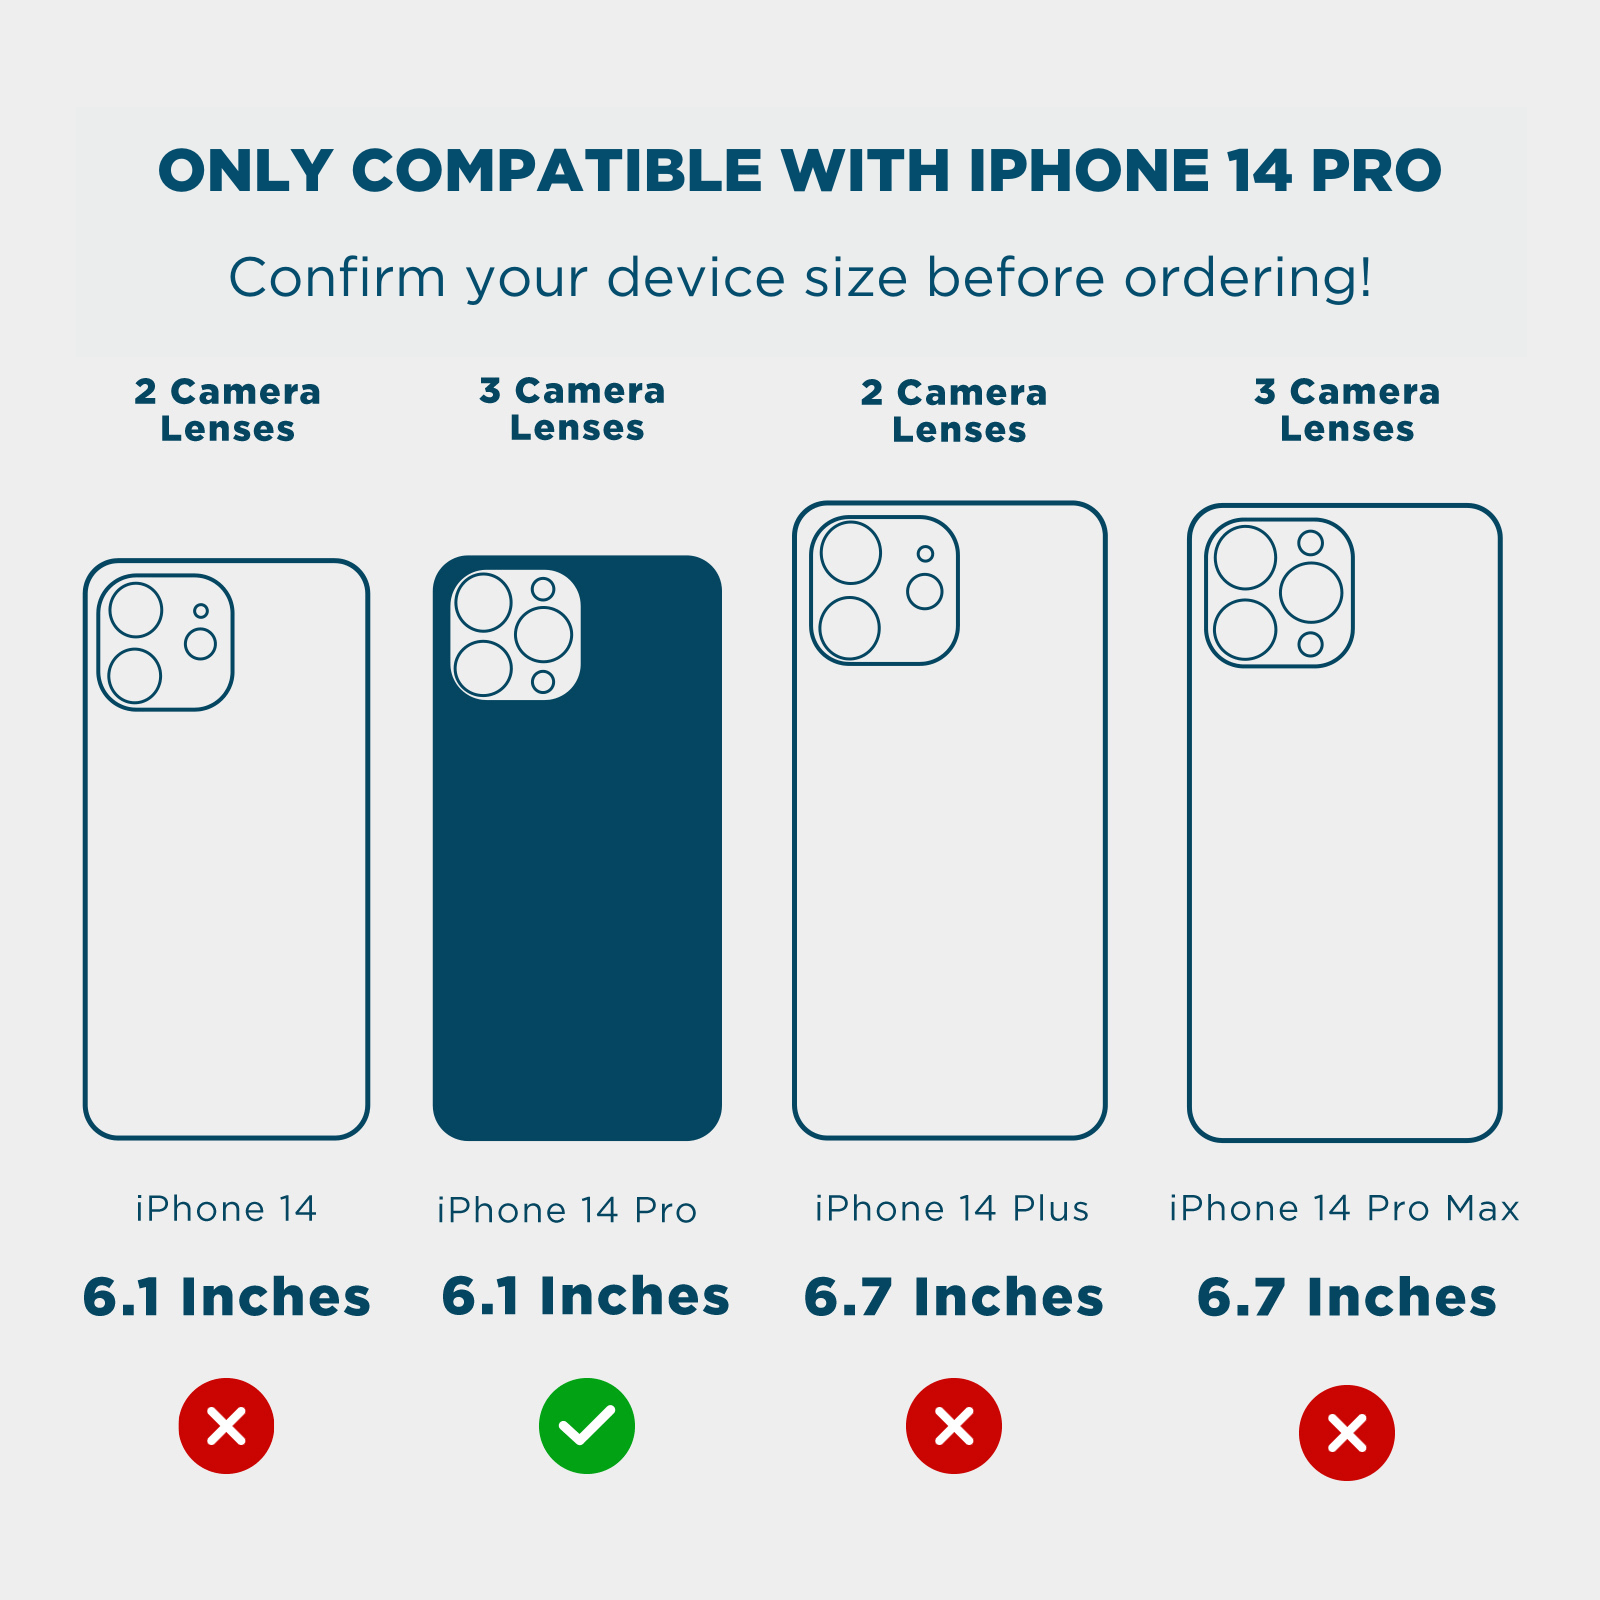 ONLY COMPATIBLE WITH IPHONE 14 PRO. CONFIRM YOUR DEVICE SIZE BEFORE ORDERING. 2 CAMERA LENSES, 3 CAMERA LENSES, 2 CAMERA LENSES, 3 CAMERA LENSES, 6.1, 6.1, 6.7, 6.7. COLOR::NEON YELLOW